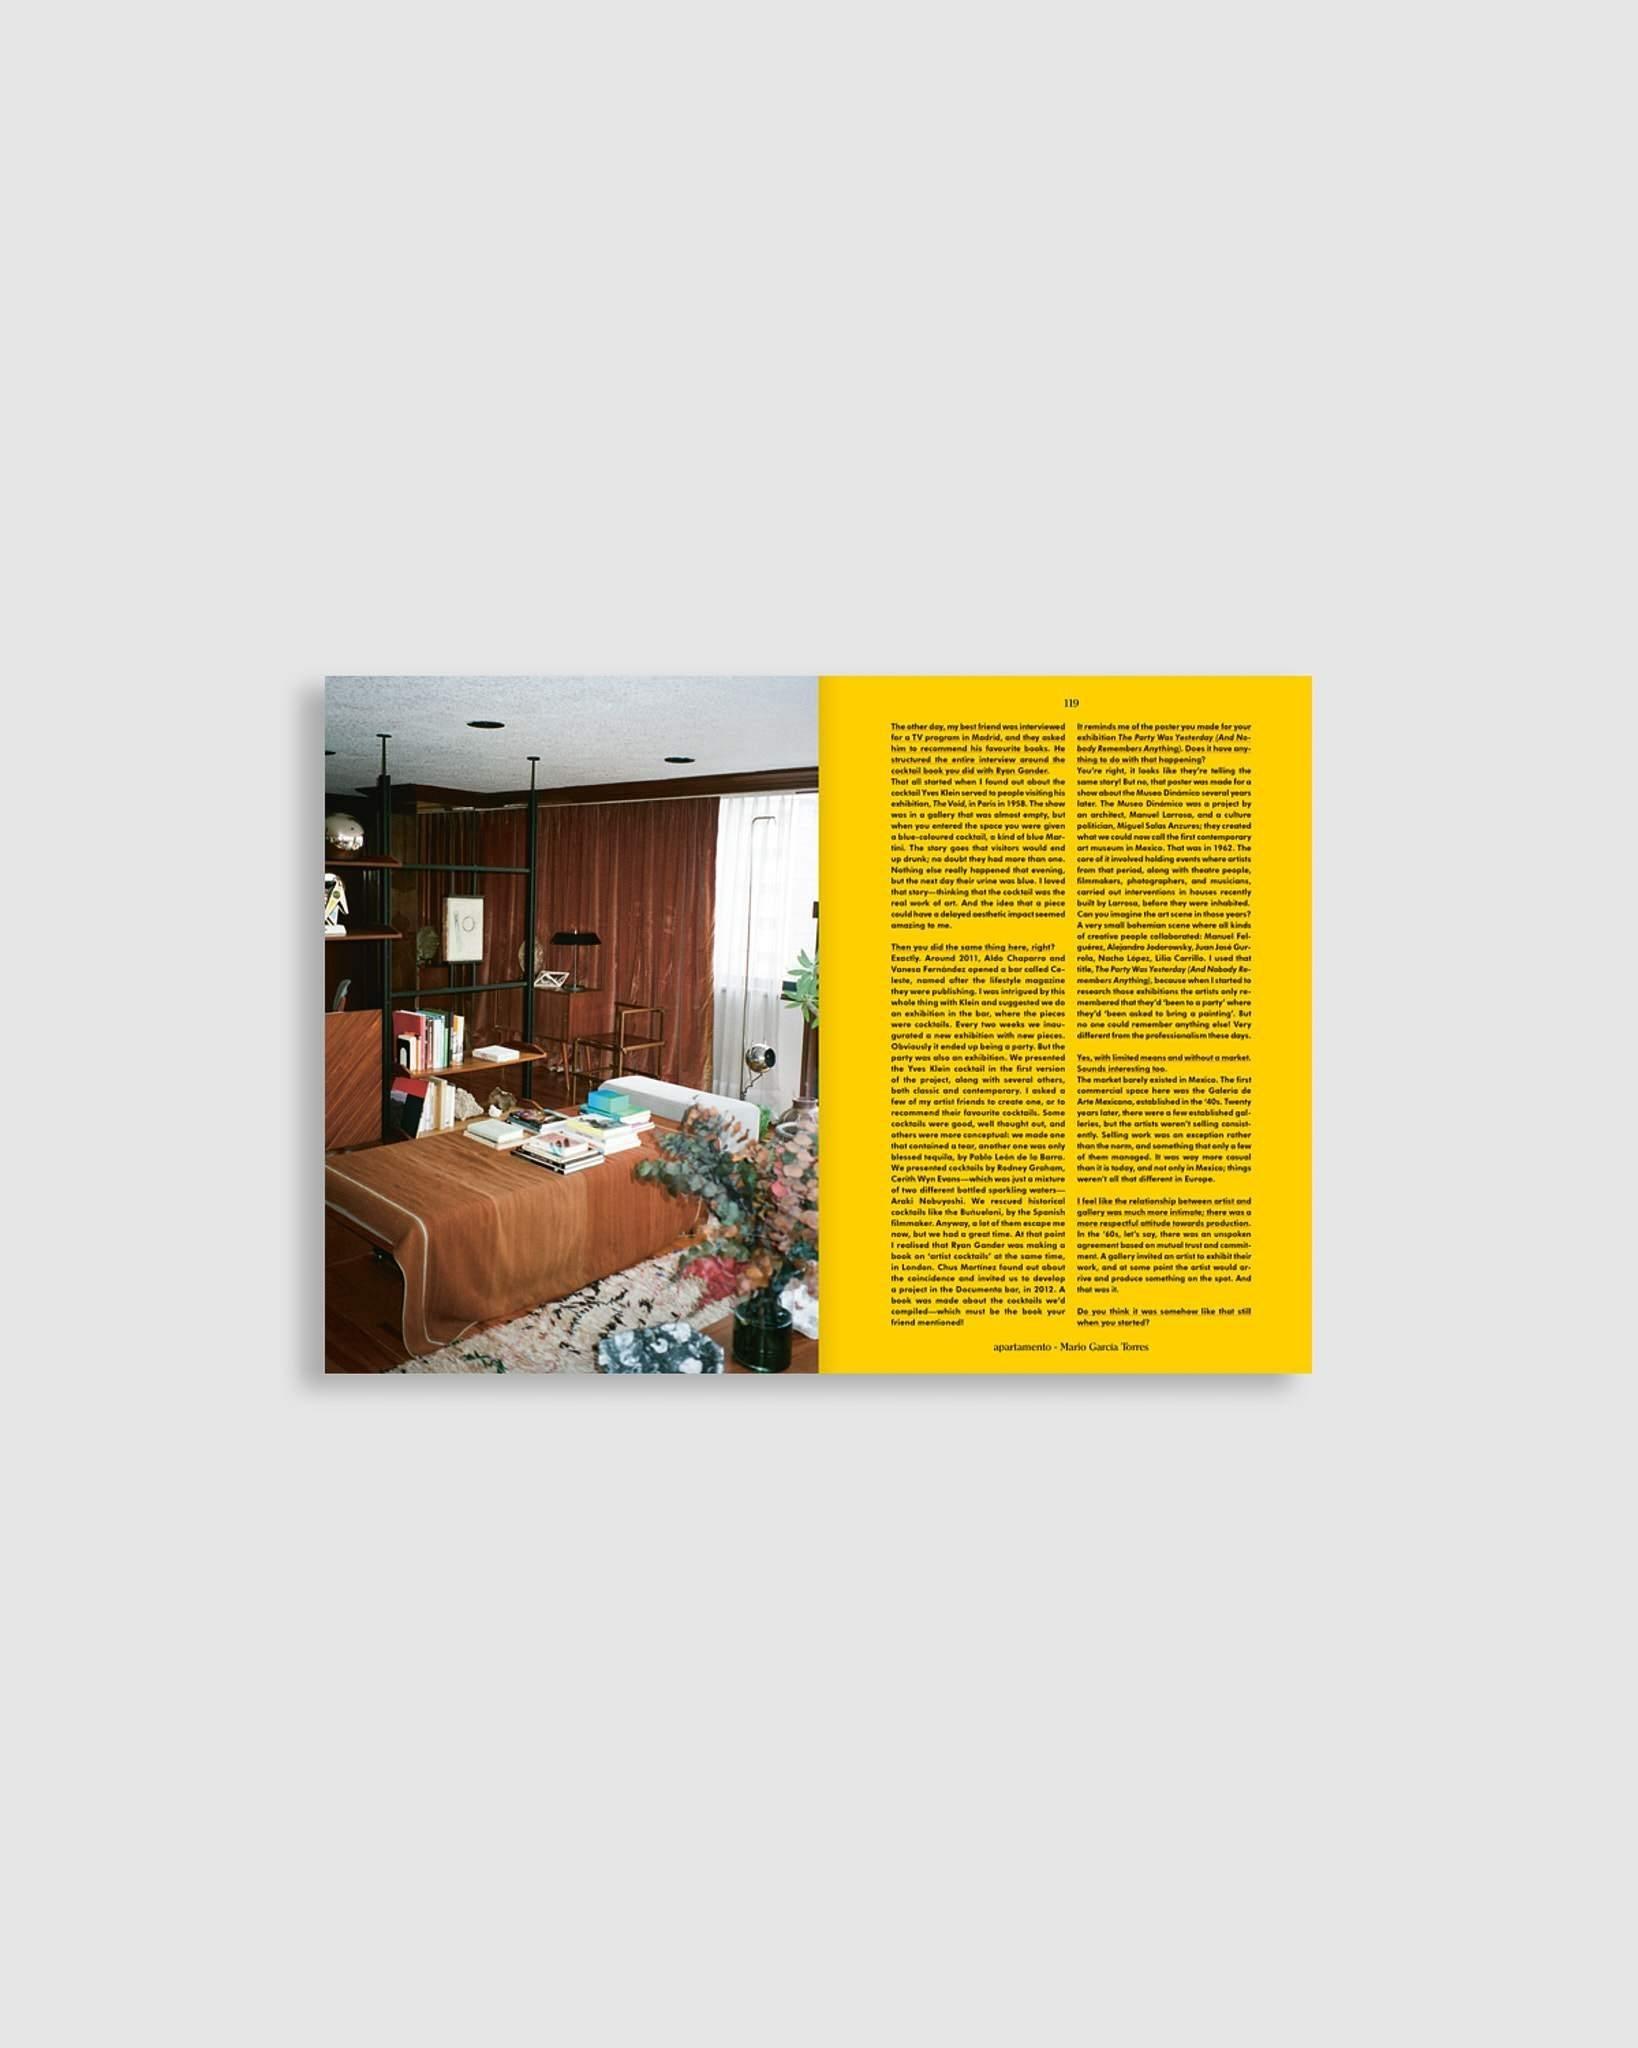 Apartamento Issue 27 - {{ collection.title }} - Chinatown Country Club 